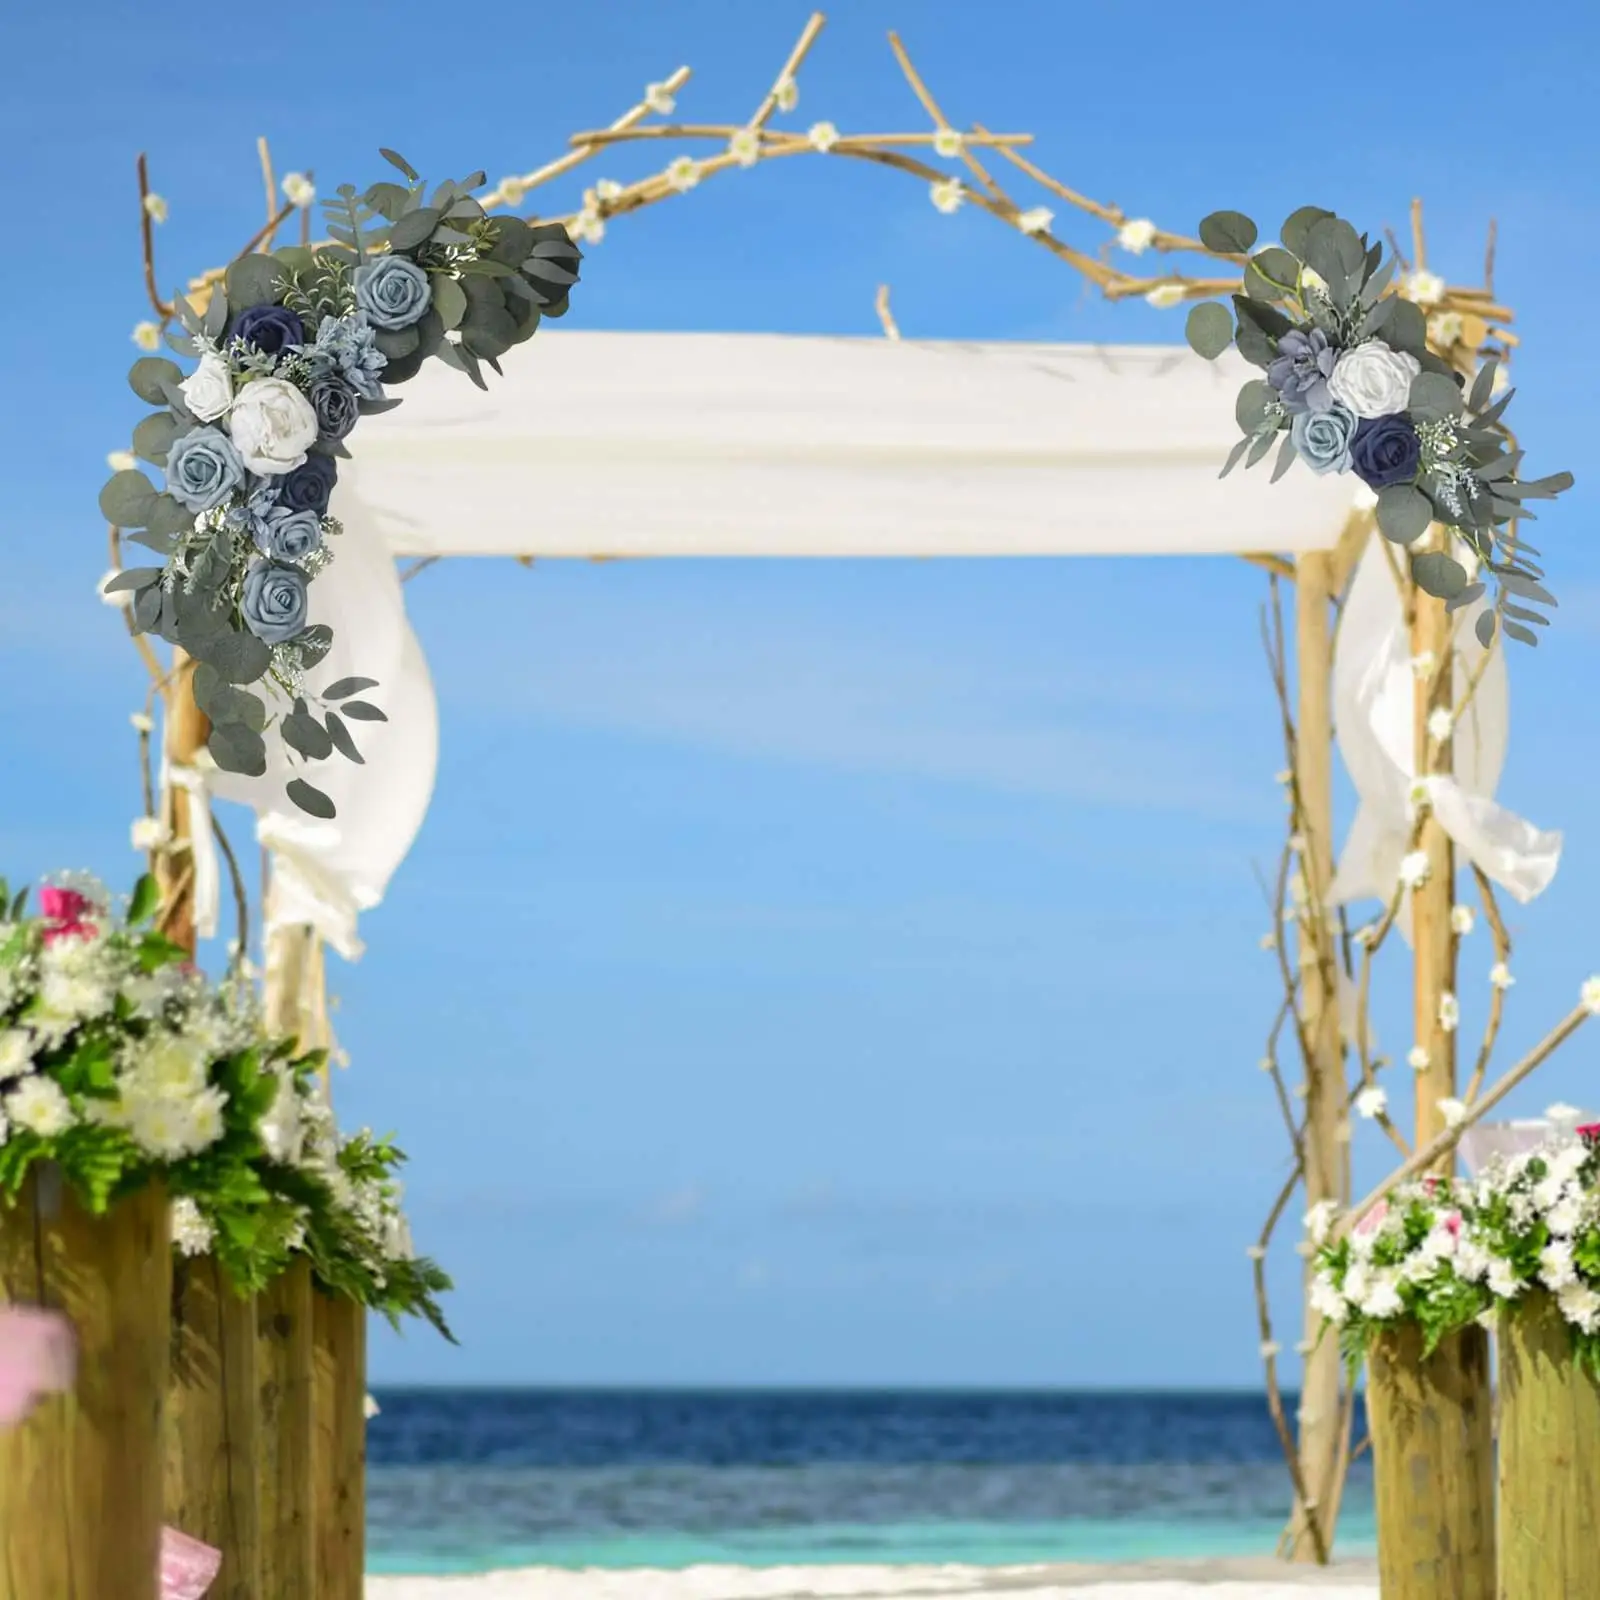 2Pcs Hanging artificial flowers Swag Wedding Arch Flowers for Wedding Arbor Ceremony Backdrop Table Centerpiece